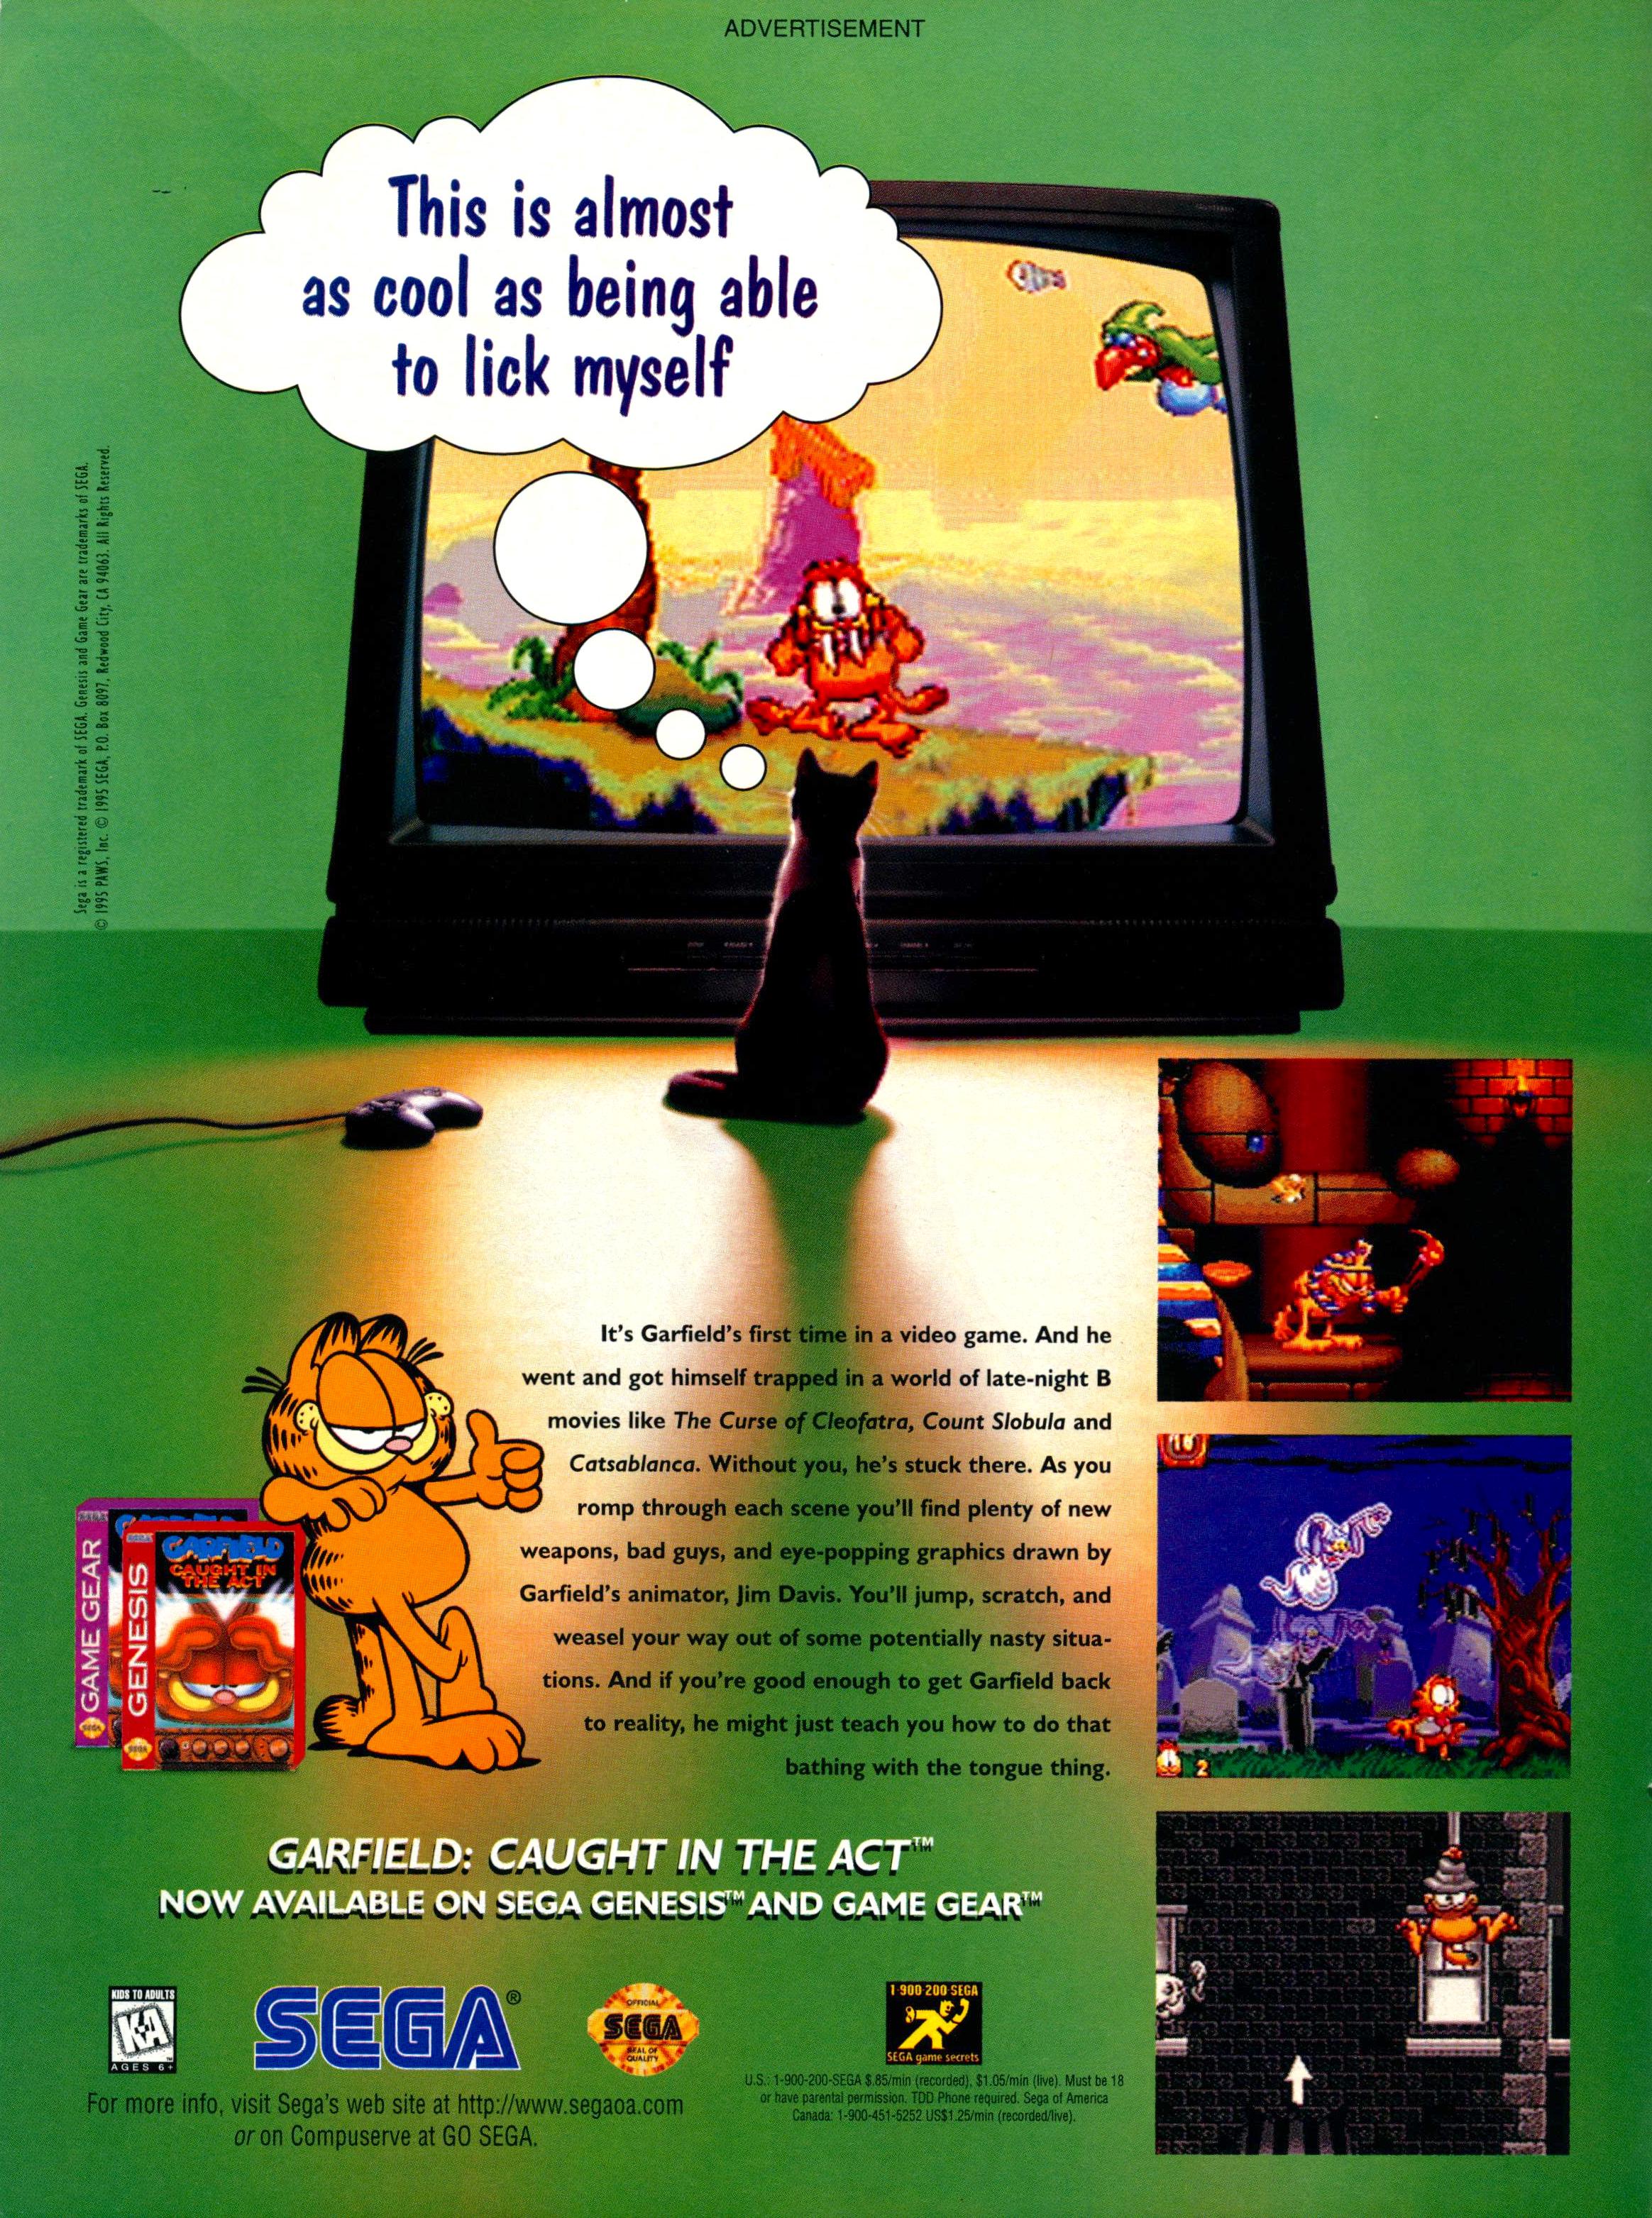 Garfield Caught In The Act Codex Gamicus Humanity S Collective Gaming Knowledge At Your Fingertips